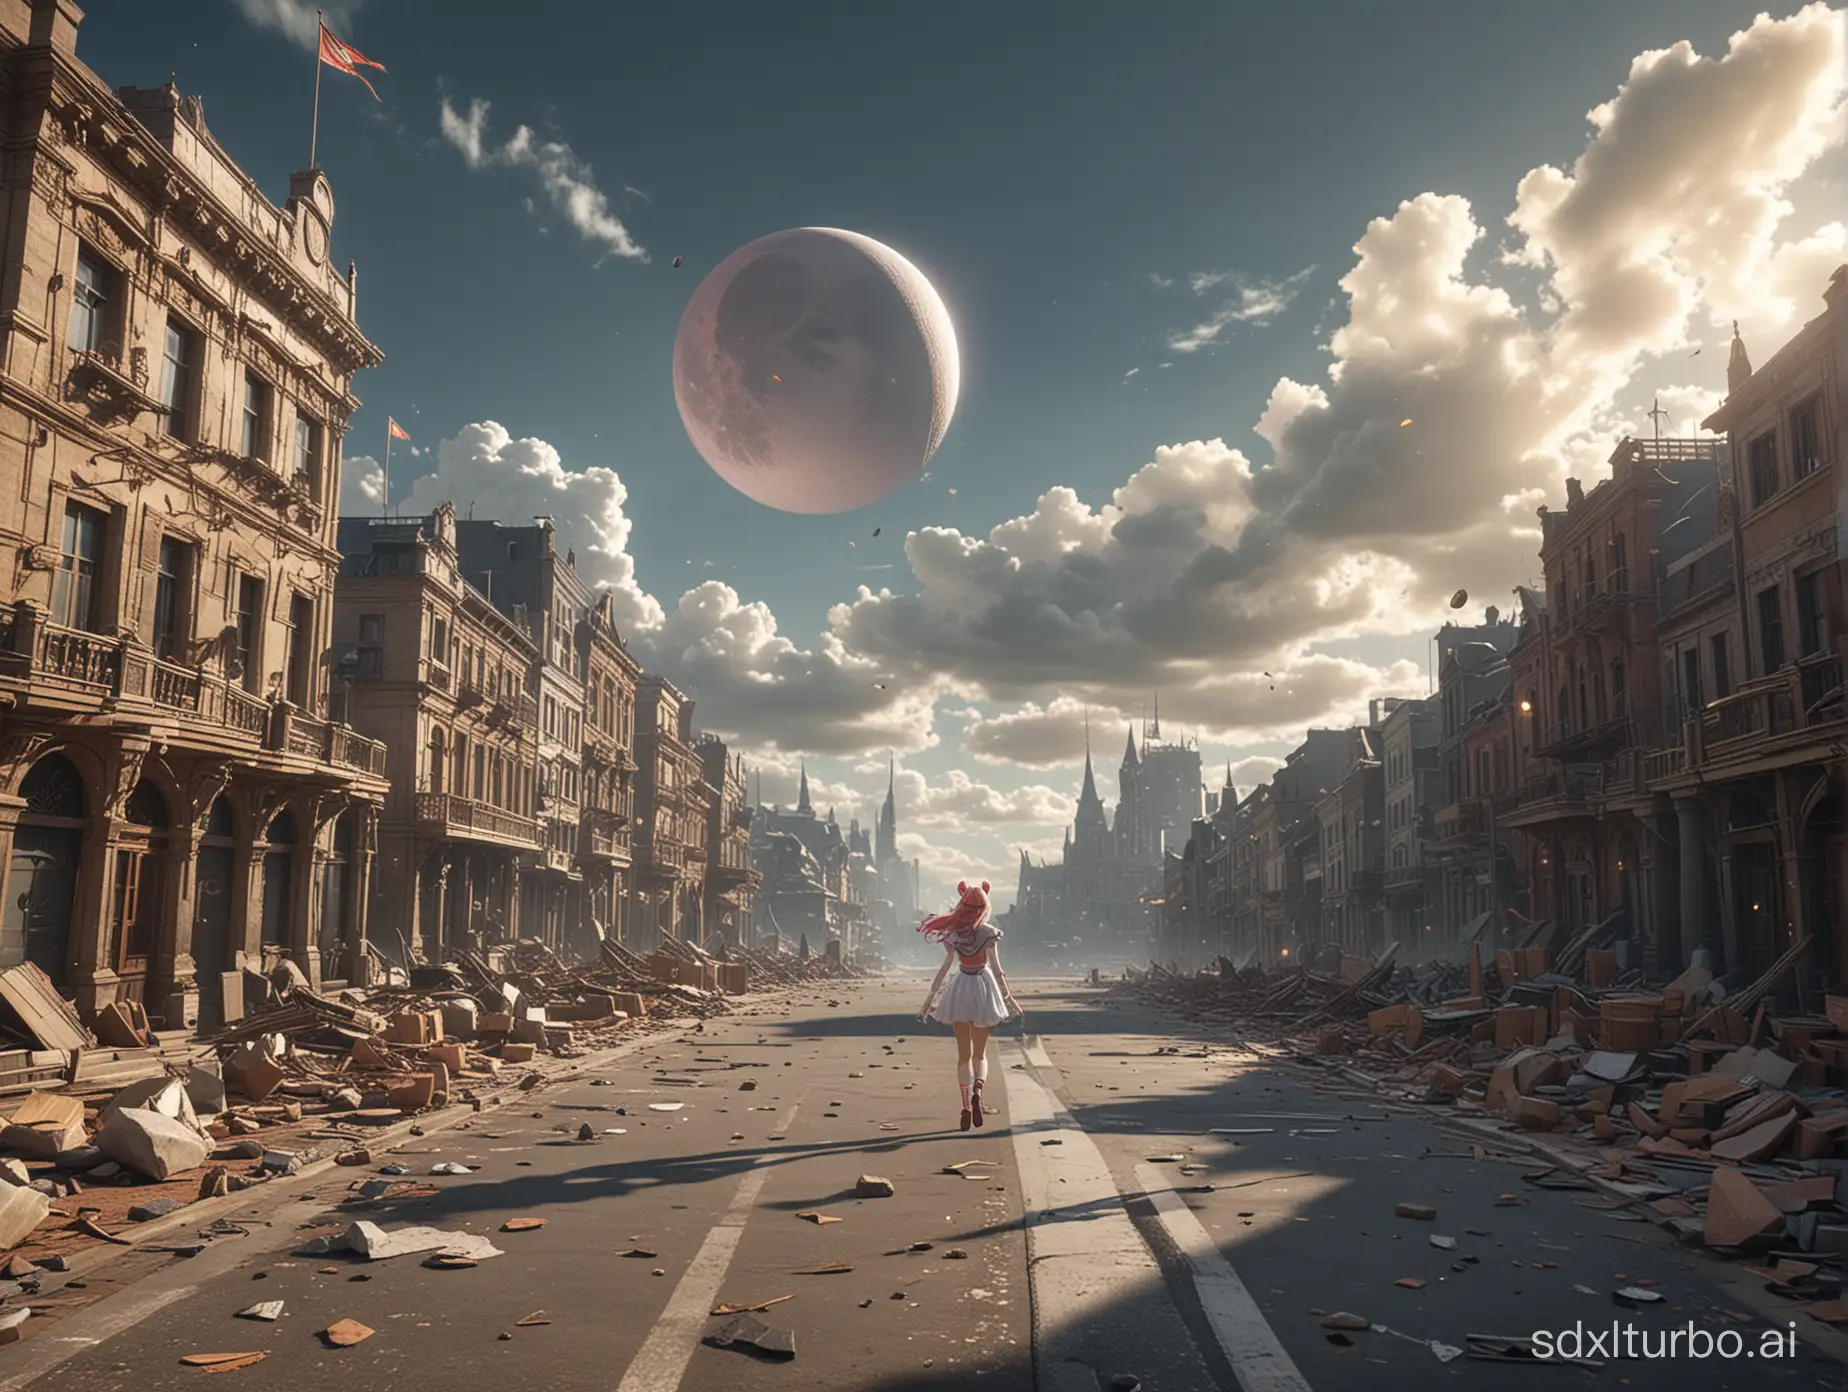 3D, V-Ray rendering, Surrealism, aerial photography, the fictional scene is rendered in ultra-high definition, emphasizing depth of field and intricate details. A giant Sailor Moon enters a town, destroying buildings, and people run away from the scene. Natural light, natural textures, depth of field, HDR